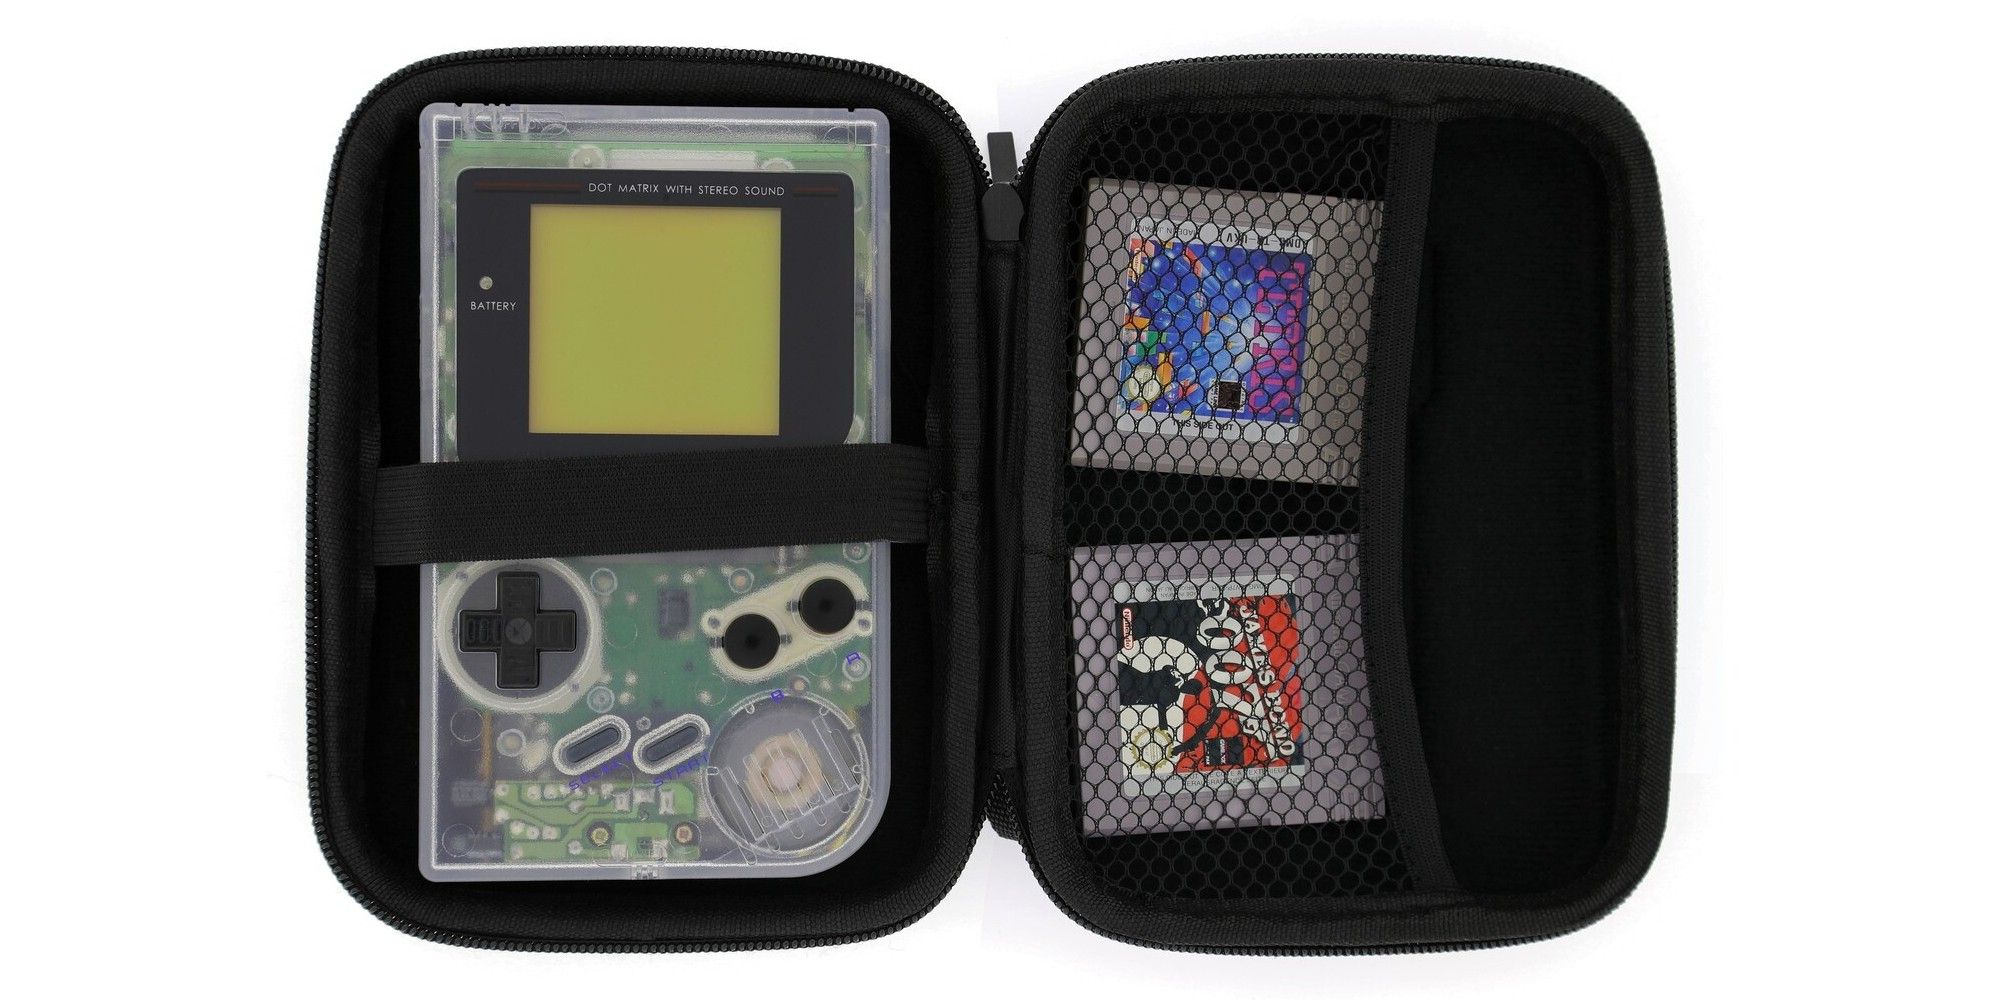 10 Best Accessories For The Game Boy Family